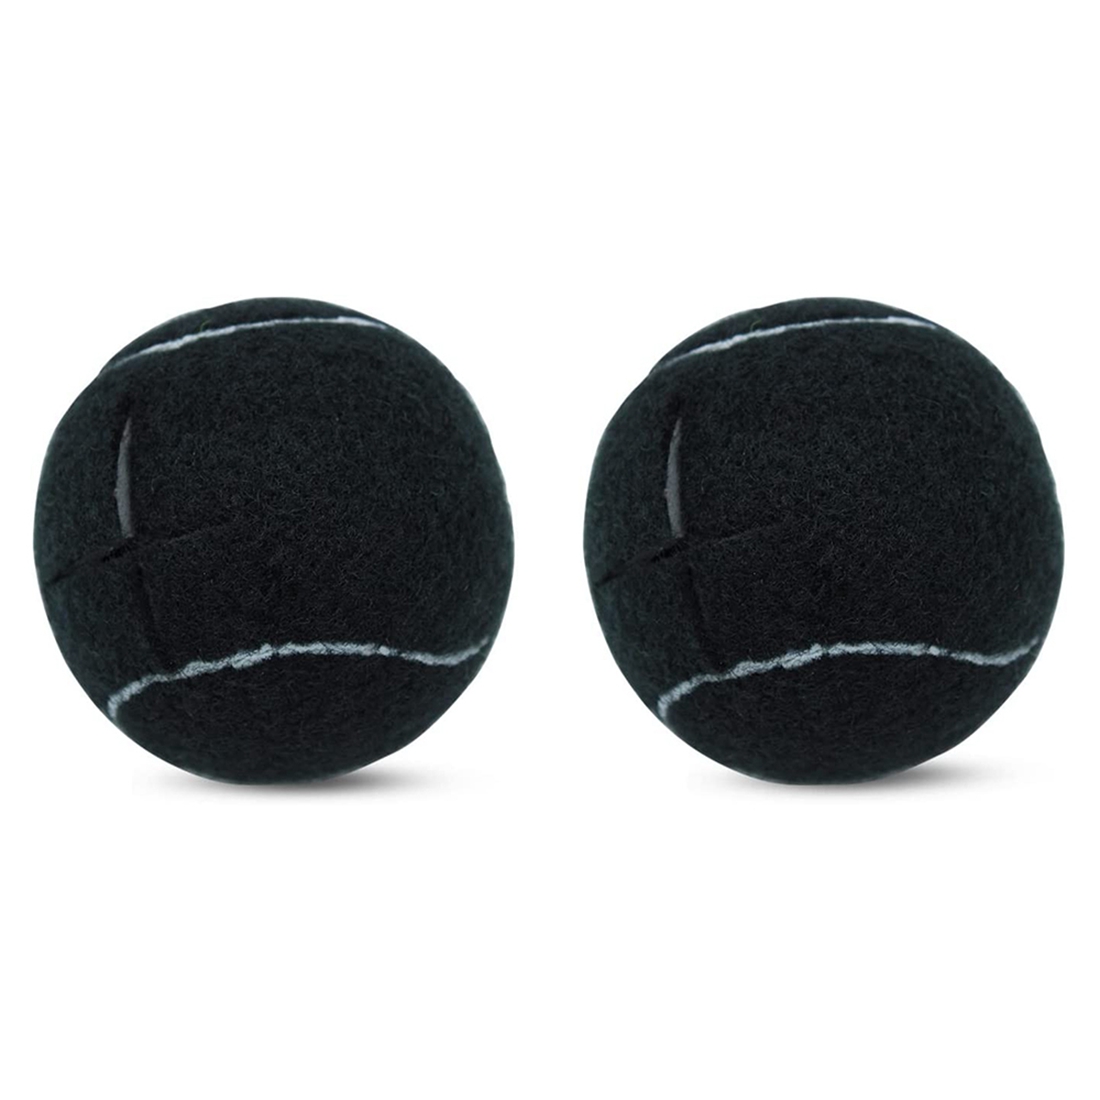 2 PCS Precut Walker Tennis Ball for Furniture Legs and Floor Protection